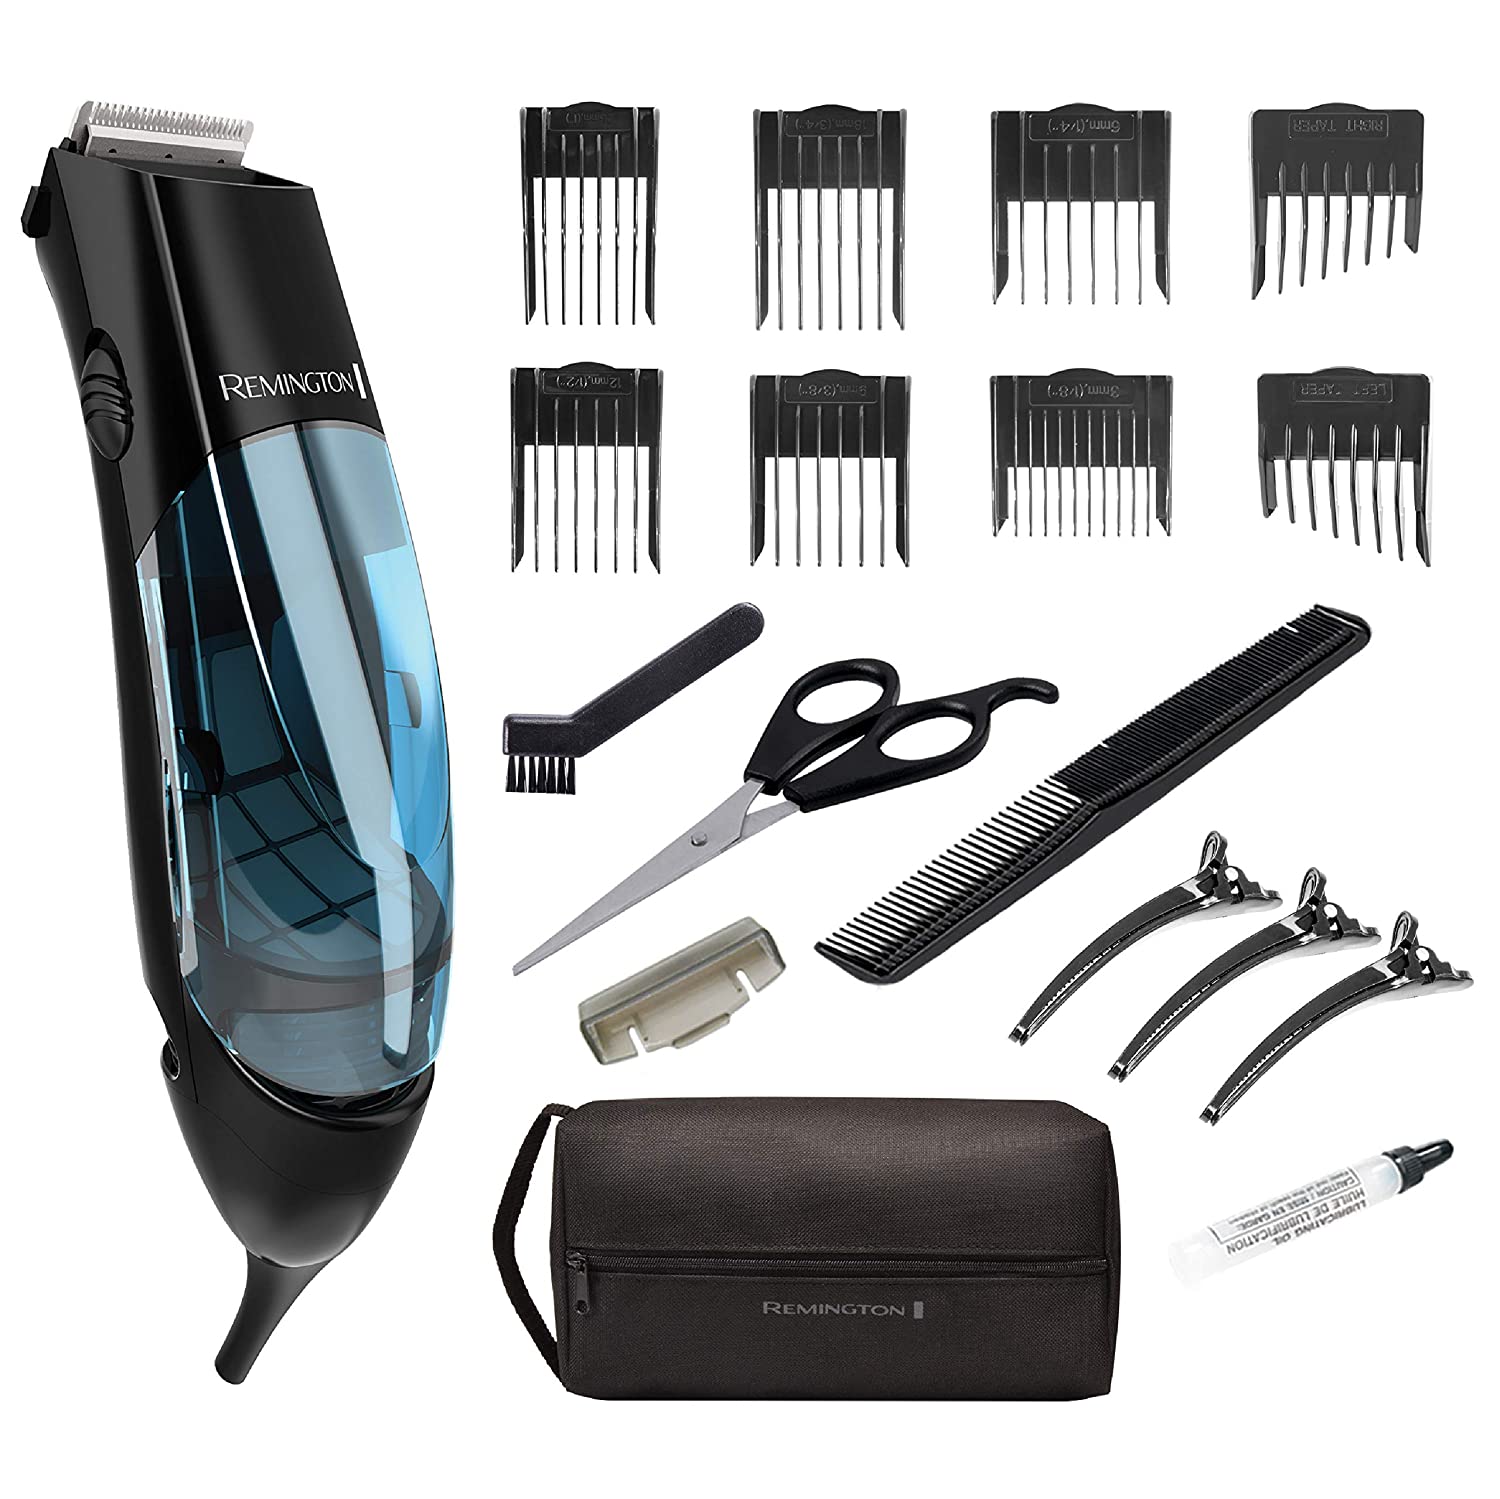 Beard trimmer With vacuum